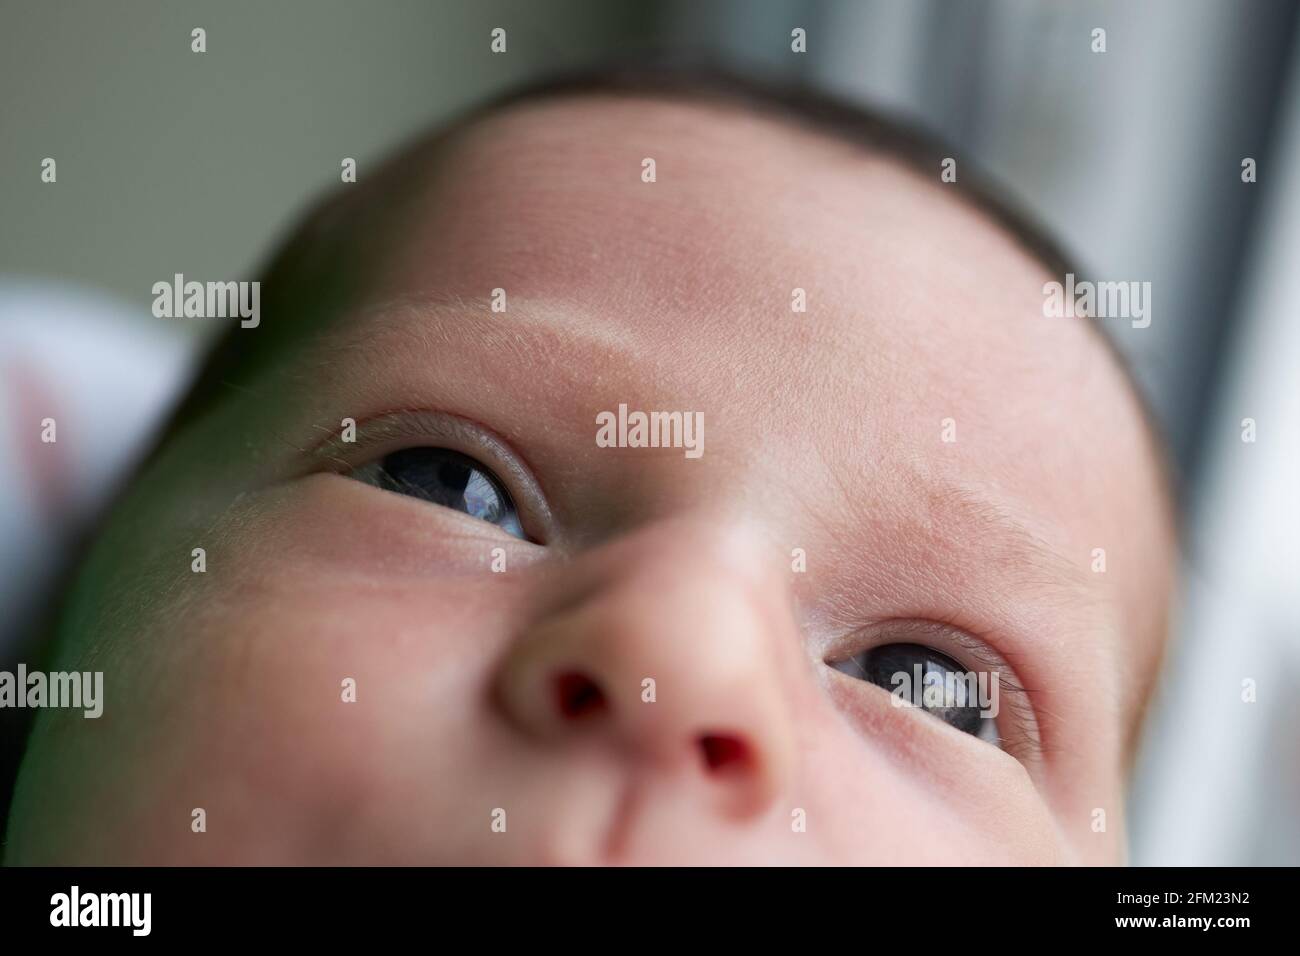 Beautiful eyes pf a newborn baby, hope and life concept Stock Photo